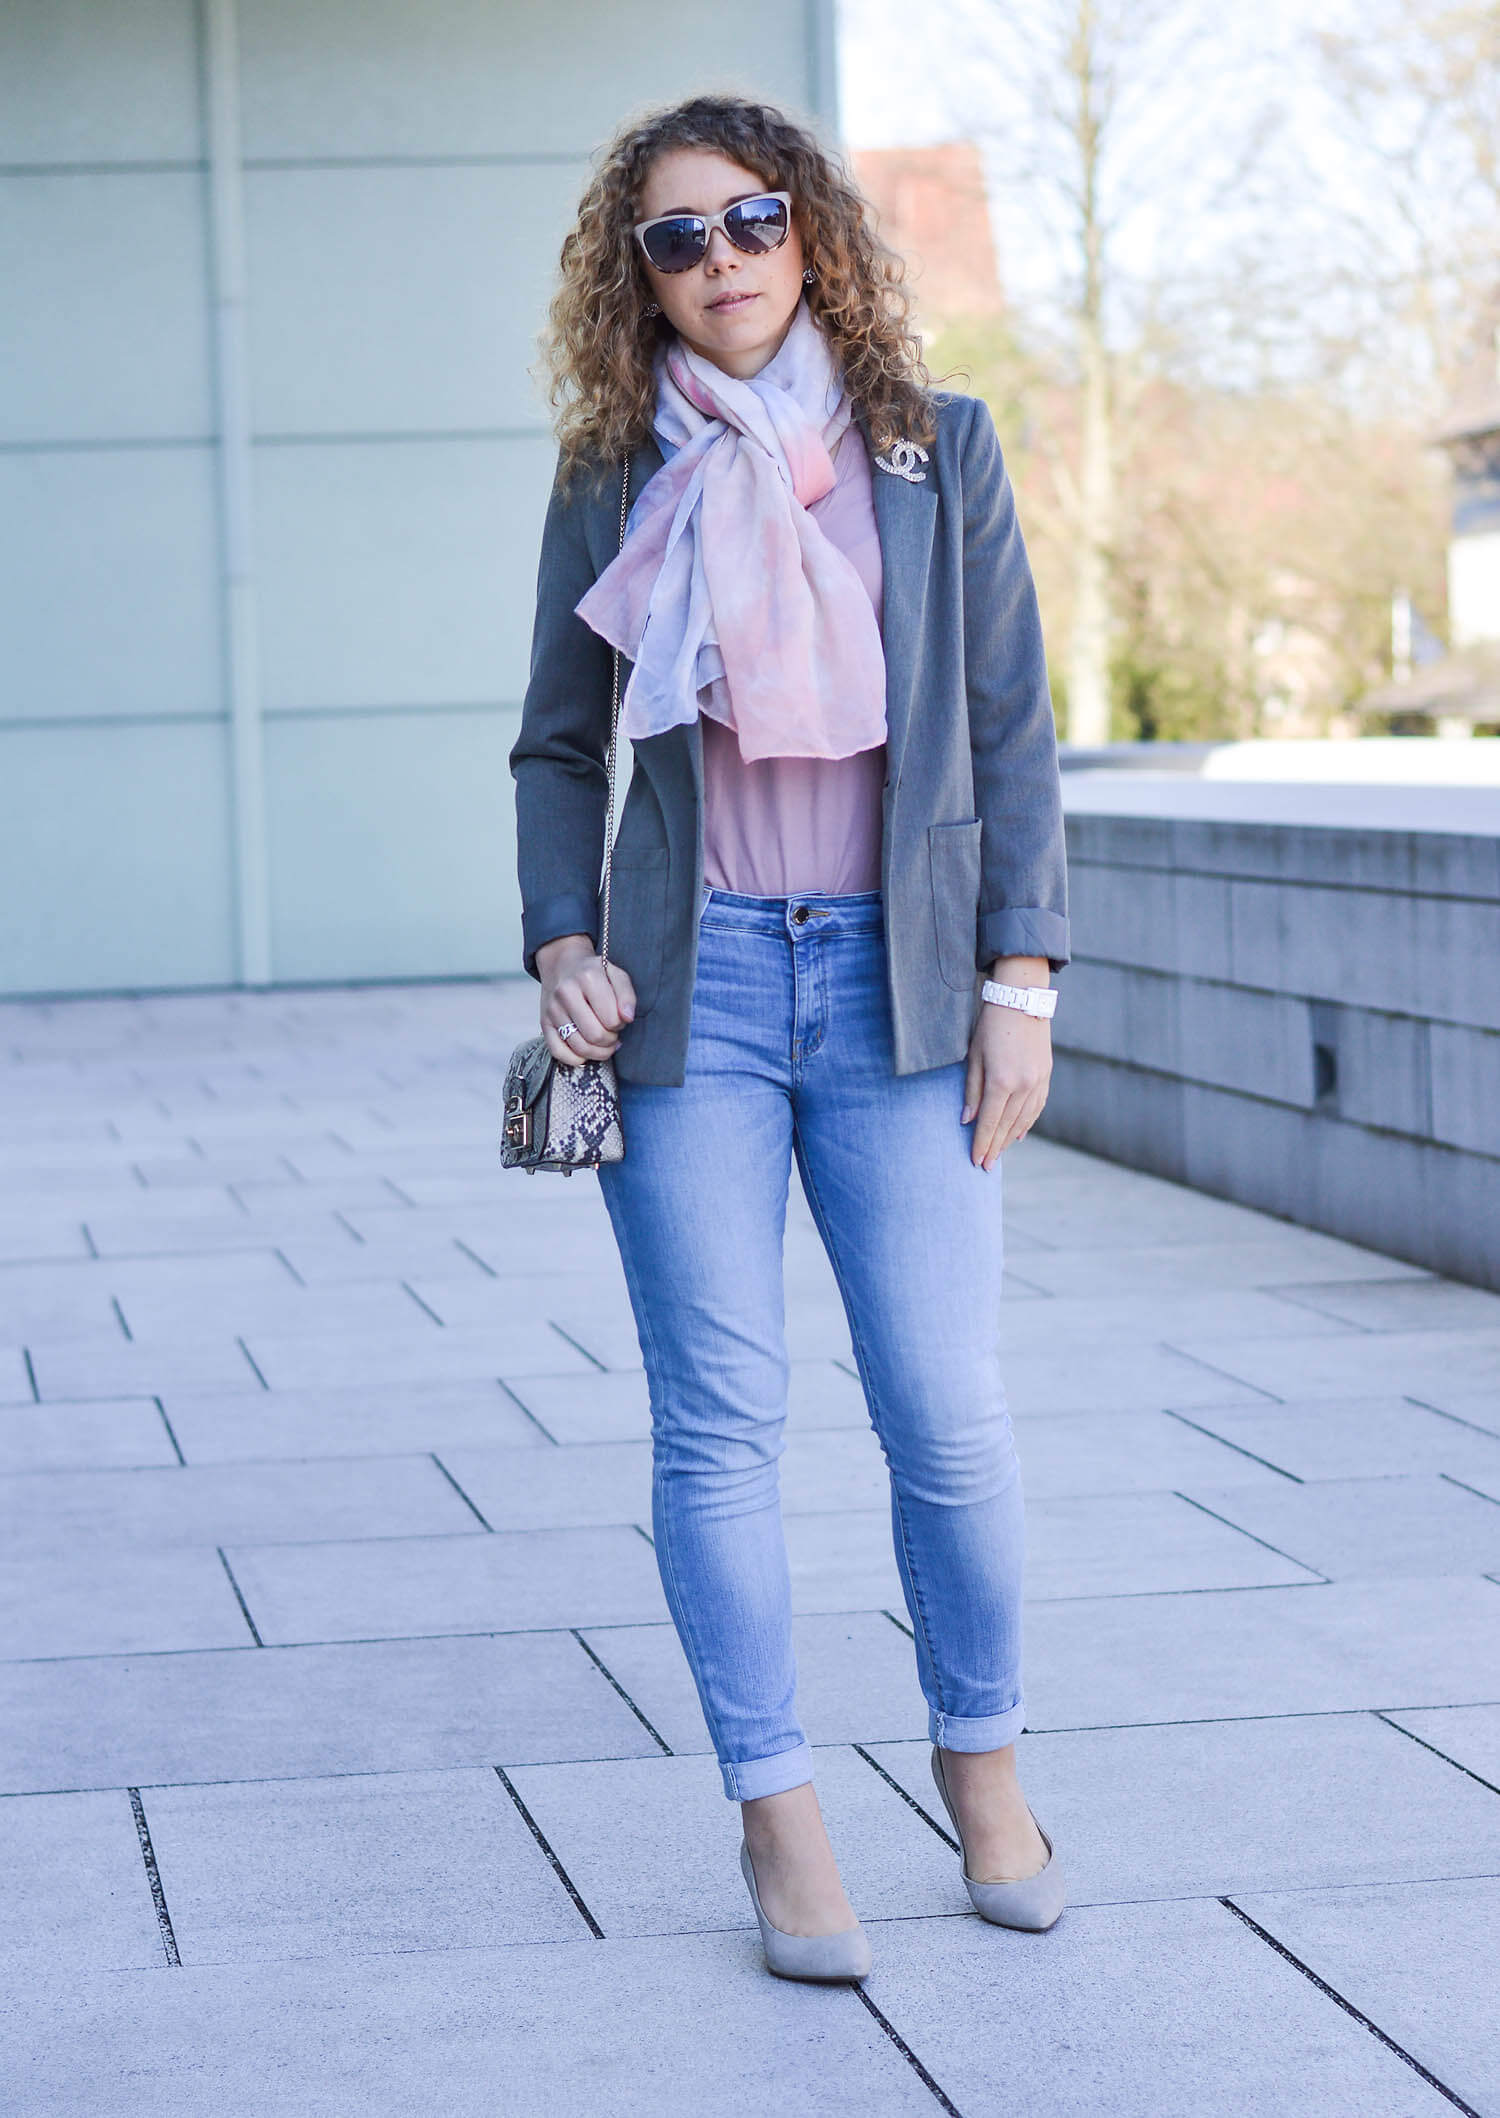 kationette-fashionblog-nrw-Outfit-Pastel-Spring-look-furla-chanel-streetstyle